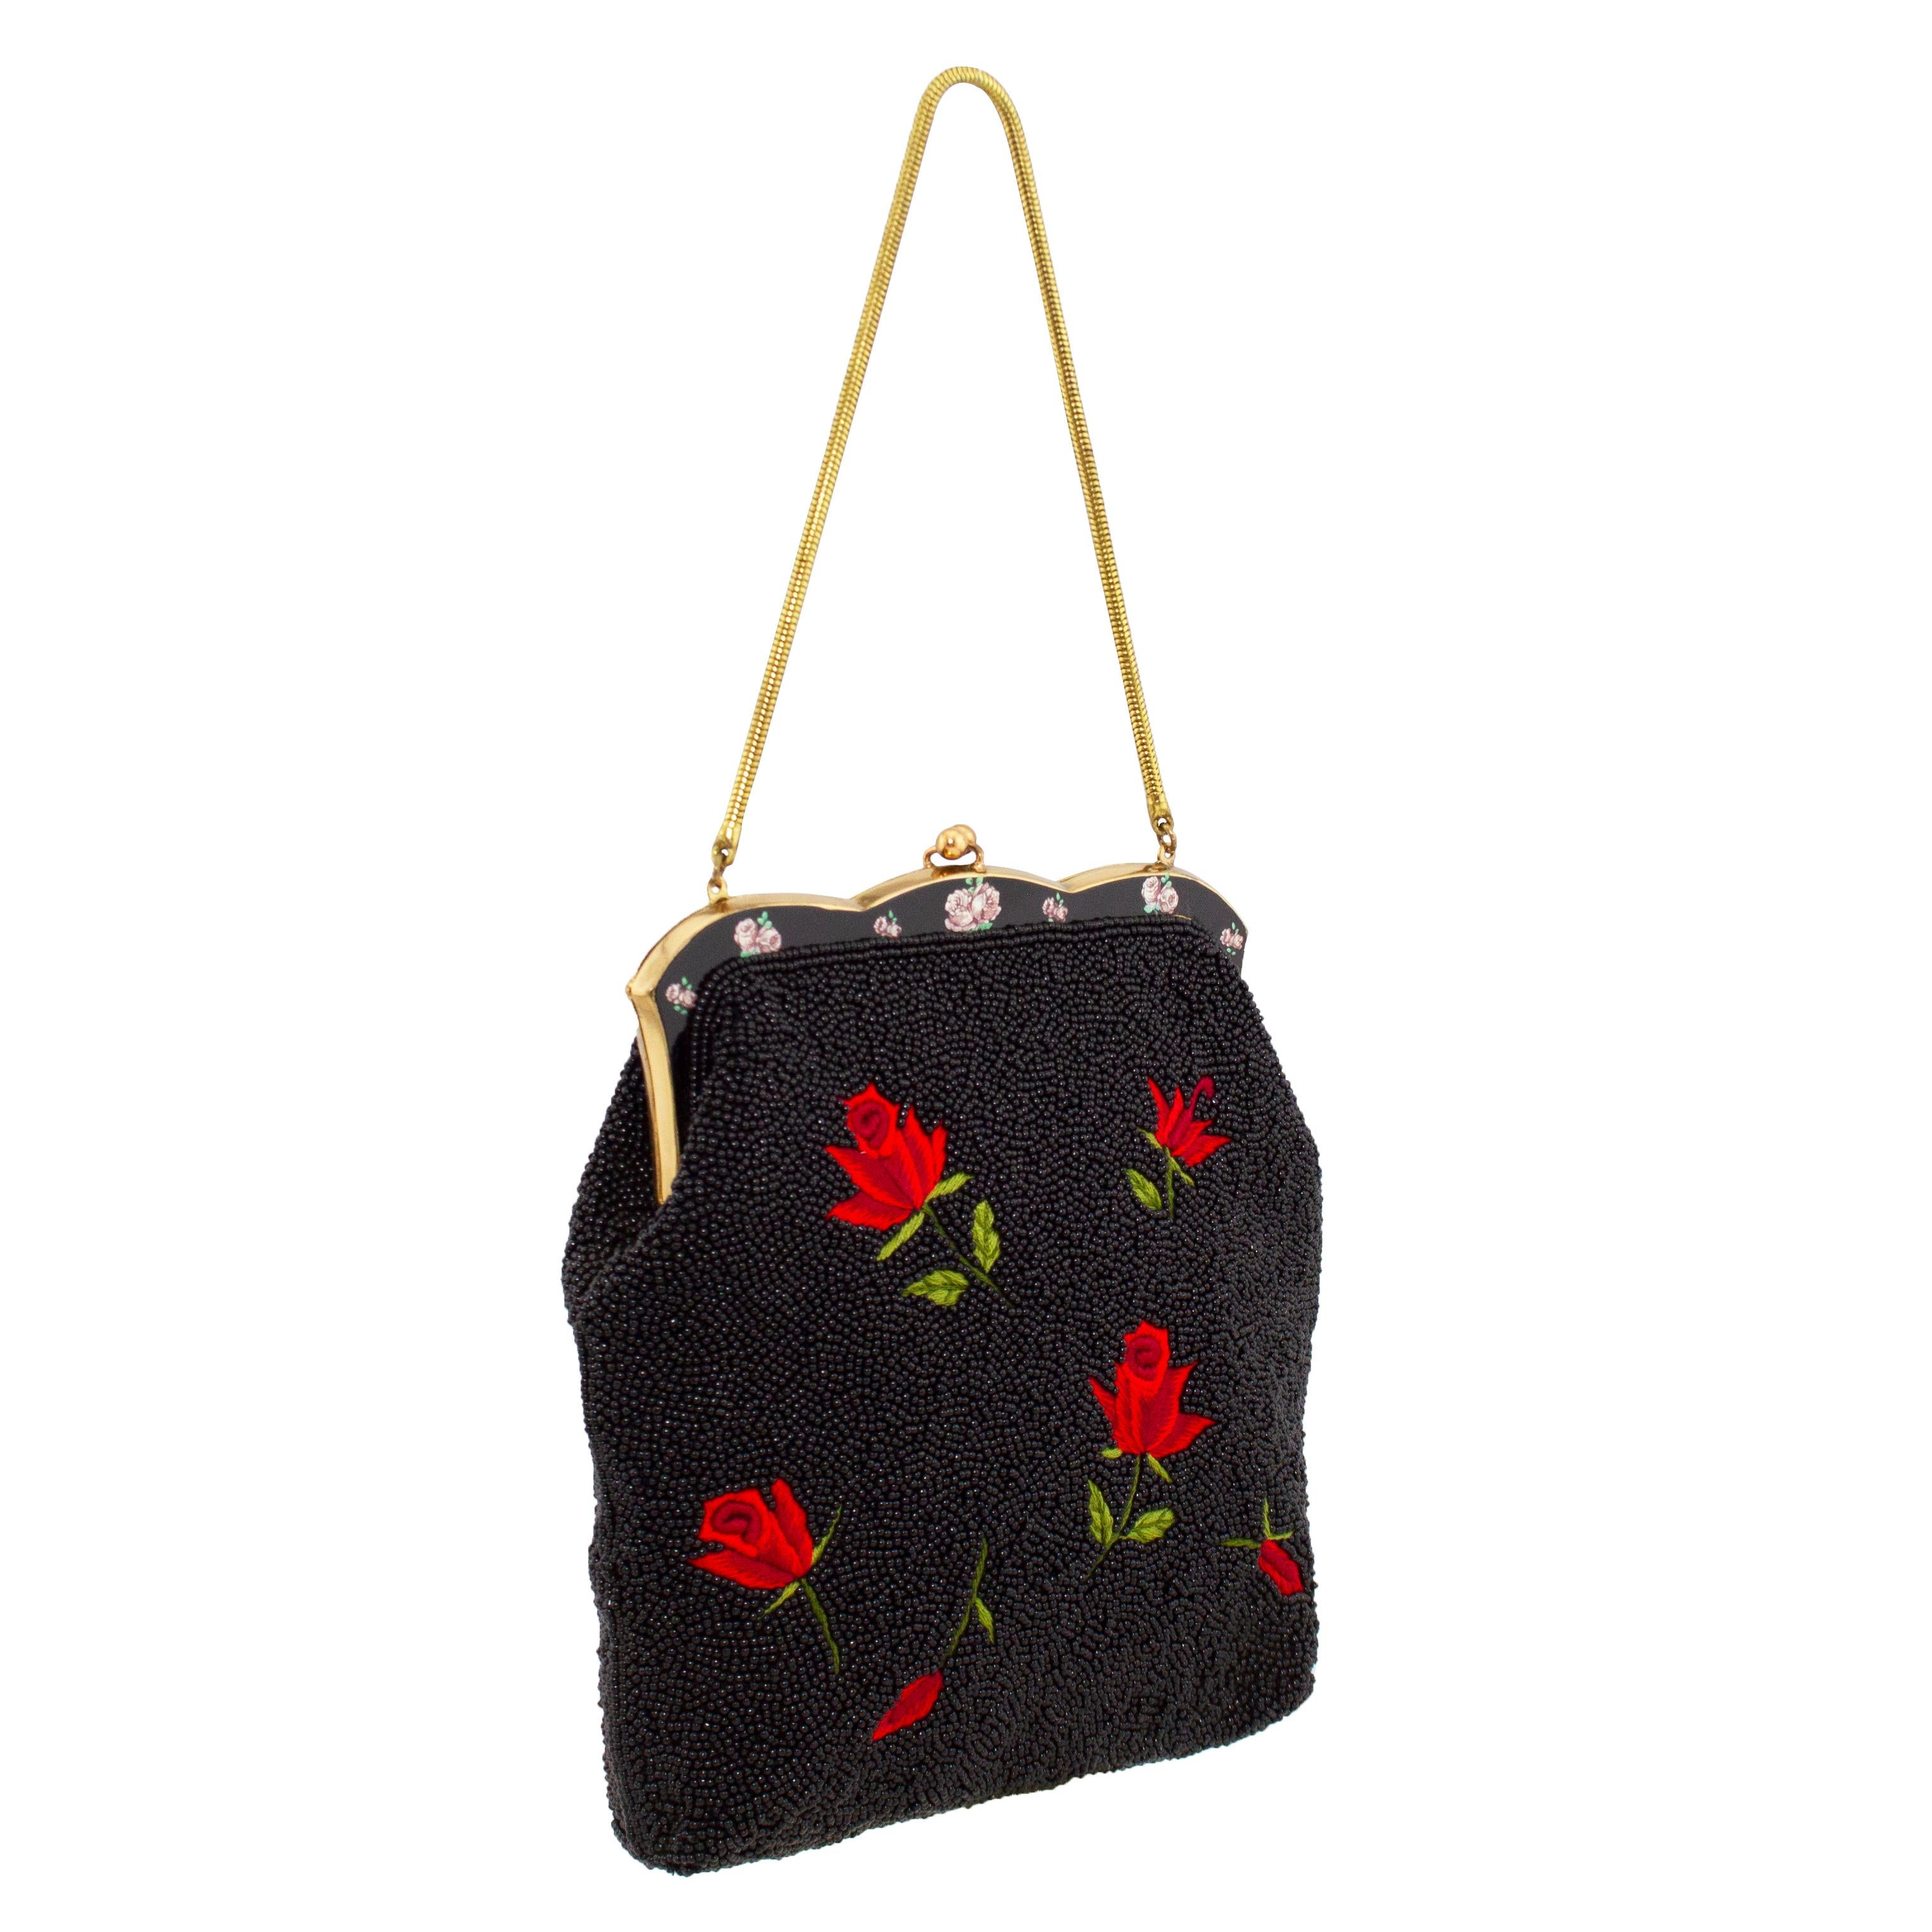 The most beautiful evening bag from the 1950s. This piece is completely encrusted in tiny jet black seed beads that are vividly contrasted by embroidered red and green roses. The frame of the bag is gold tone and black metal with small pink rose